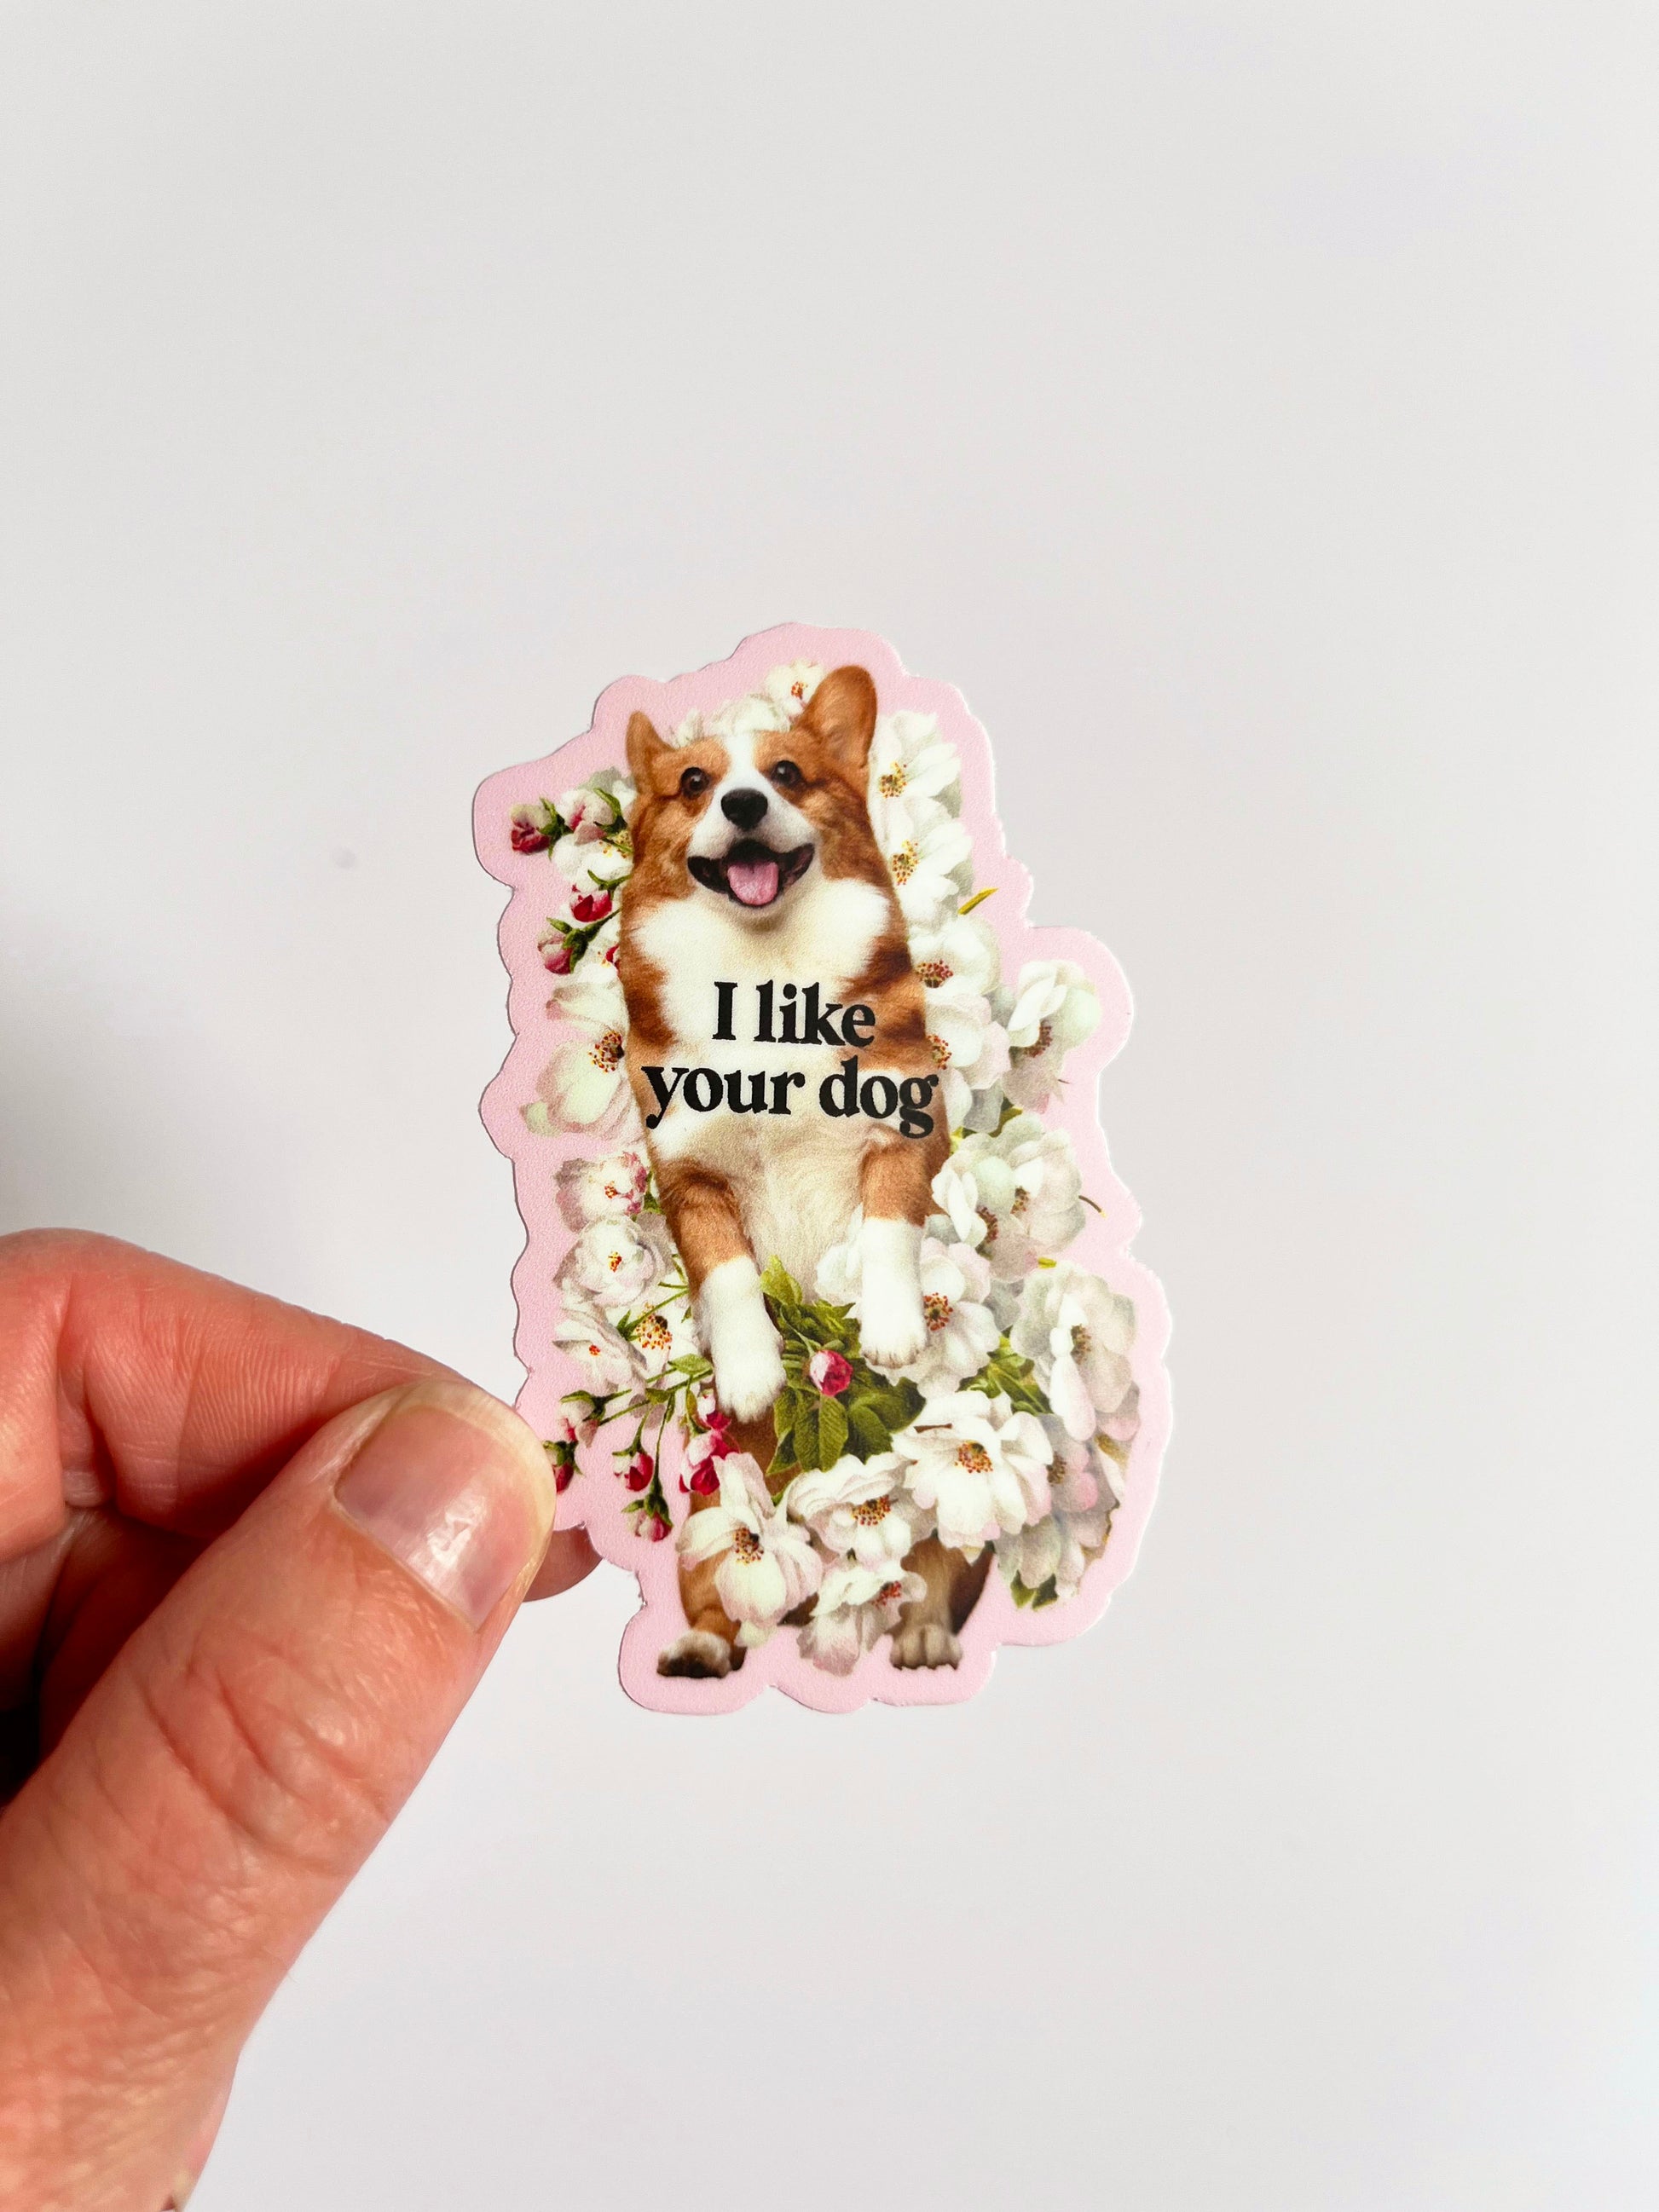 cute sticker for dog lovers puppy i like your dog sticker dog sticker pink floral corgi fun funny stickers coin laundry montana